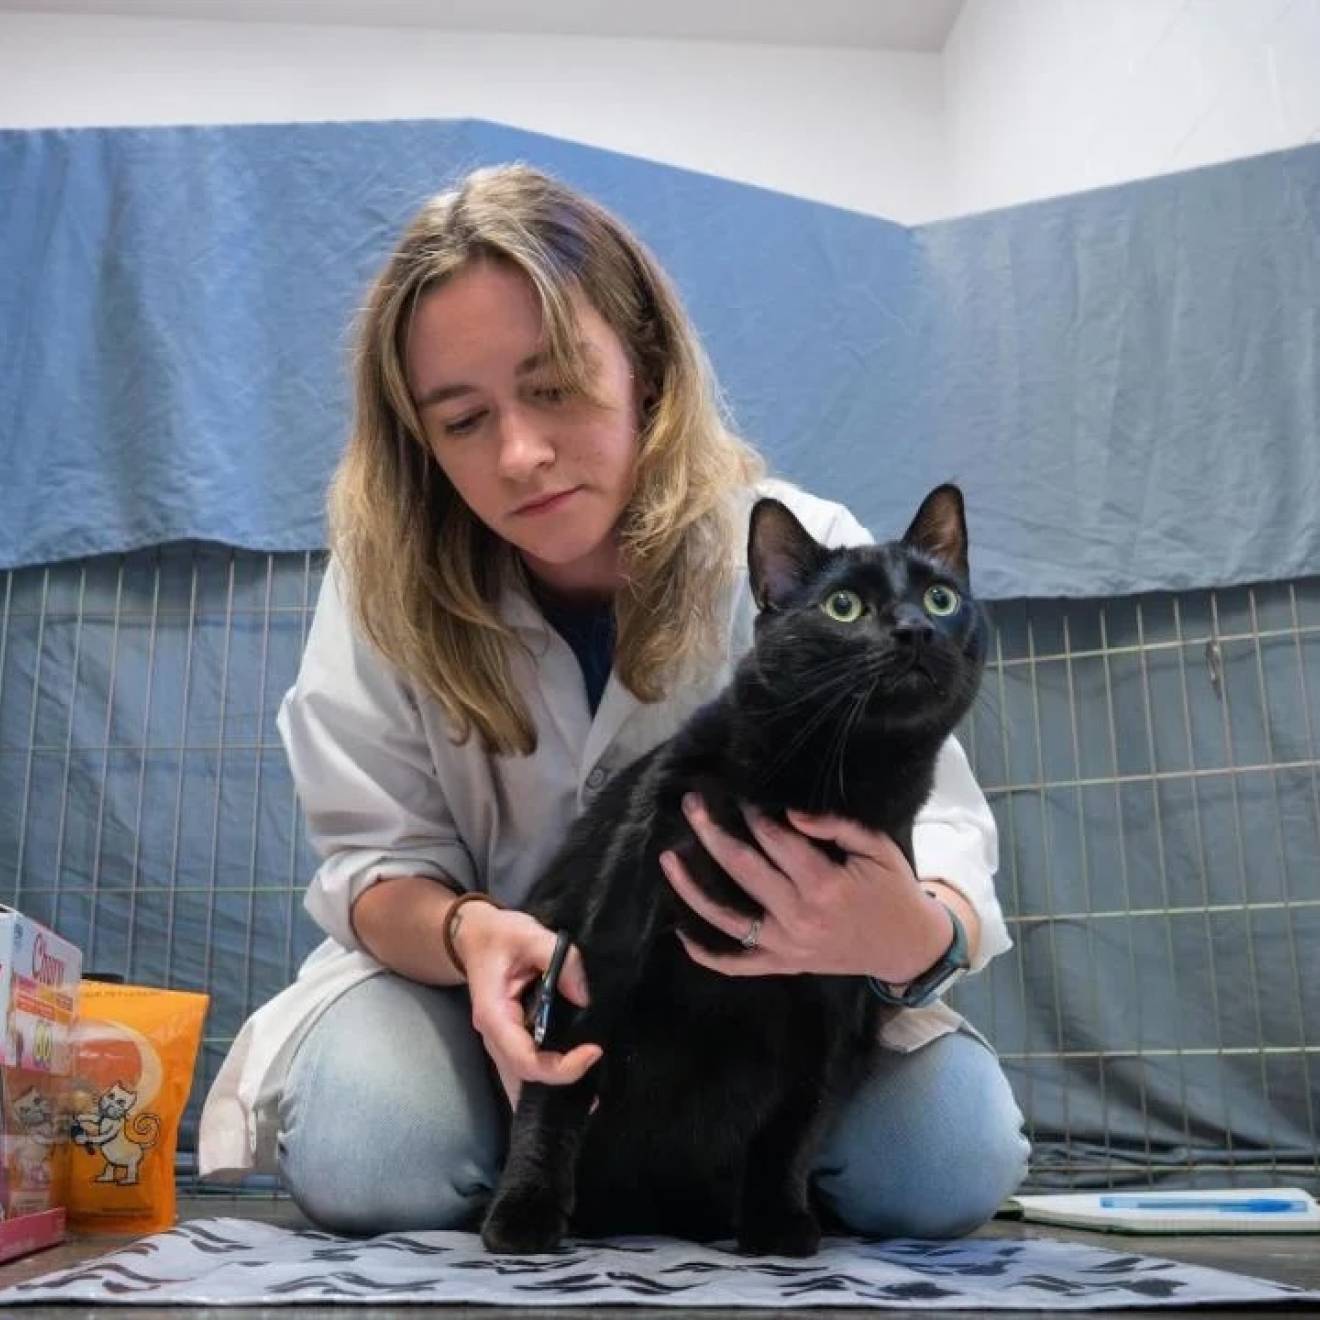 A young woman with blonde hair kneels behind a black cat holding nail trimmers. The cat is looking past the camera, and there's a tarp-covered fence and a cinder block wall in the background, suggesting an animal shelter.